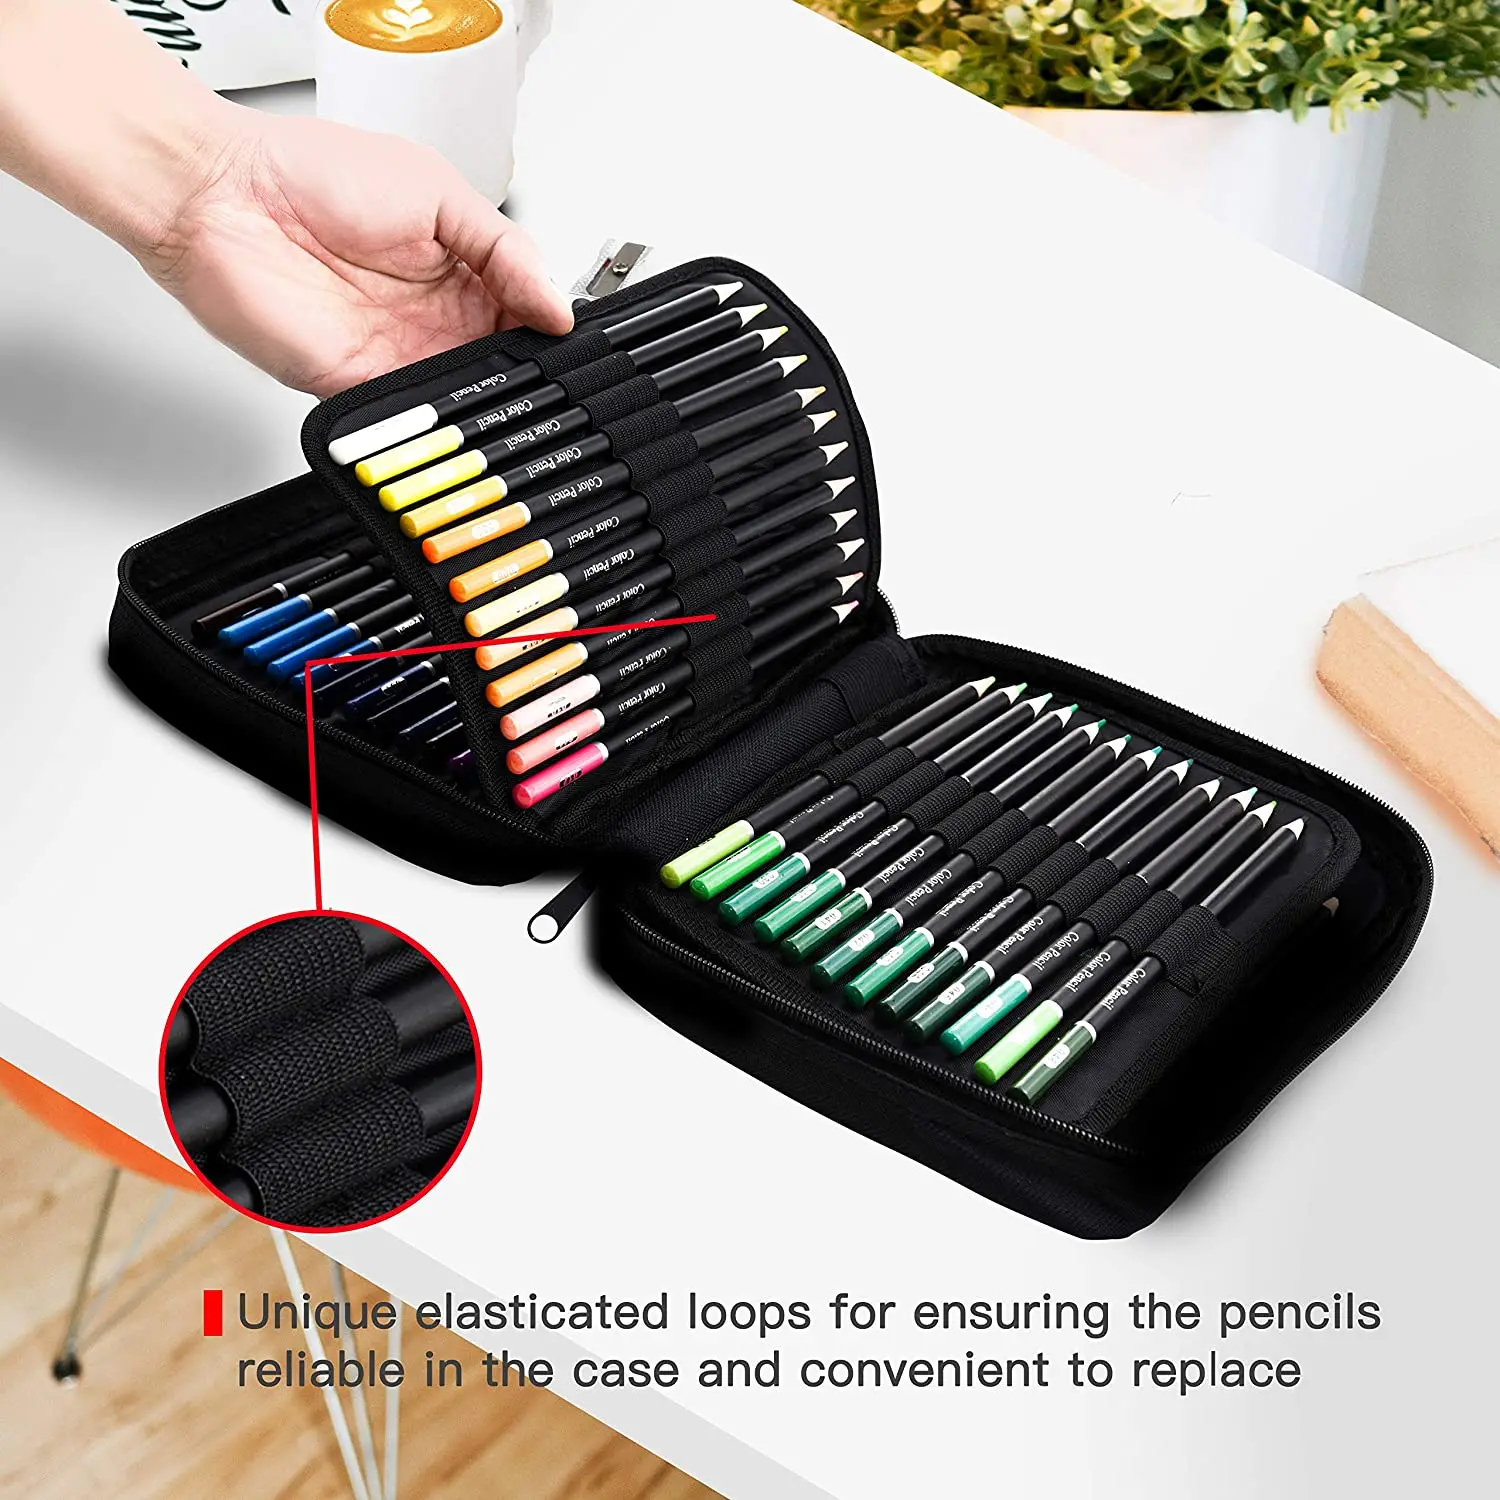 https://ae01.alicdn.com/kf/H1d76abfbaa3647b5bc48dd2e10c23506u/Colored-Pencils-Set-72-120-180-Colors-with-Zipper-Case-Professional-Drawing-Art-Supplies-for-School.jpg